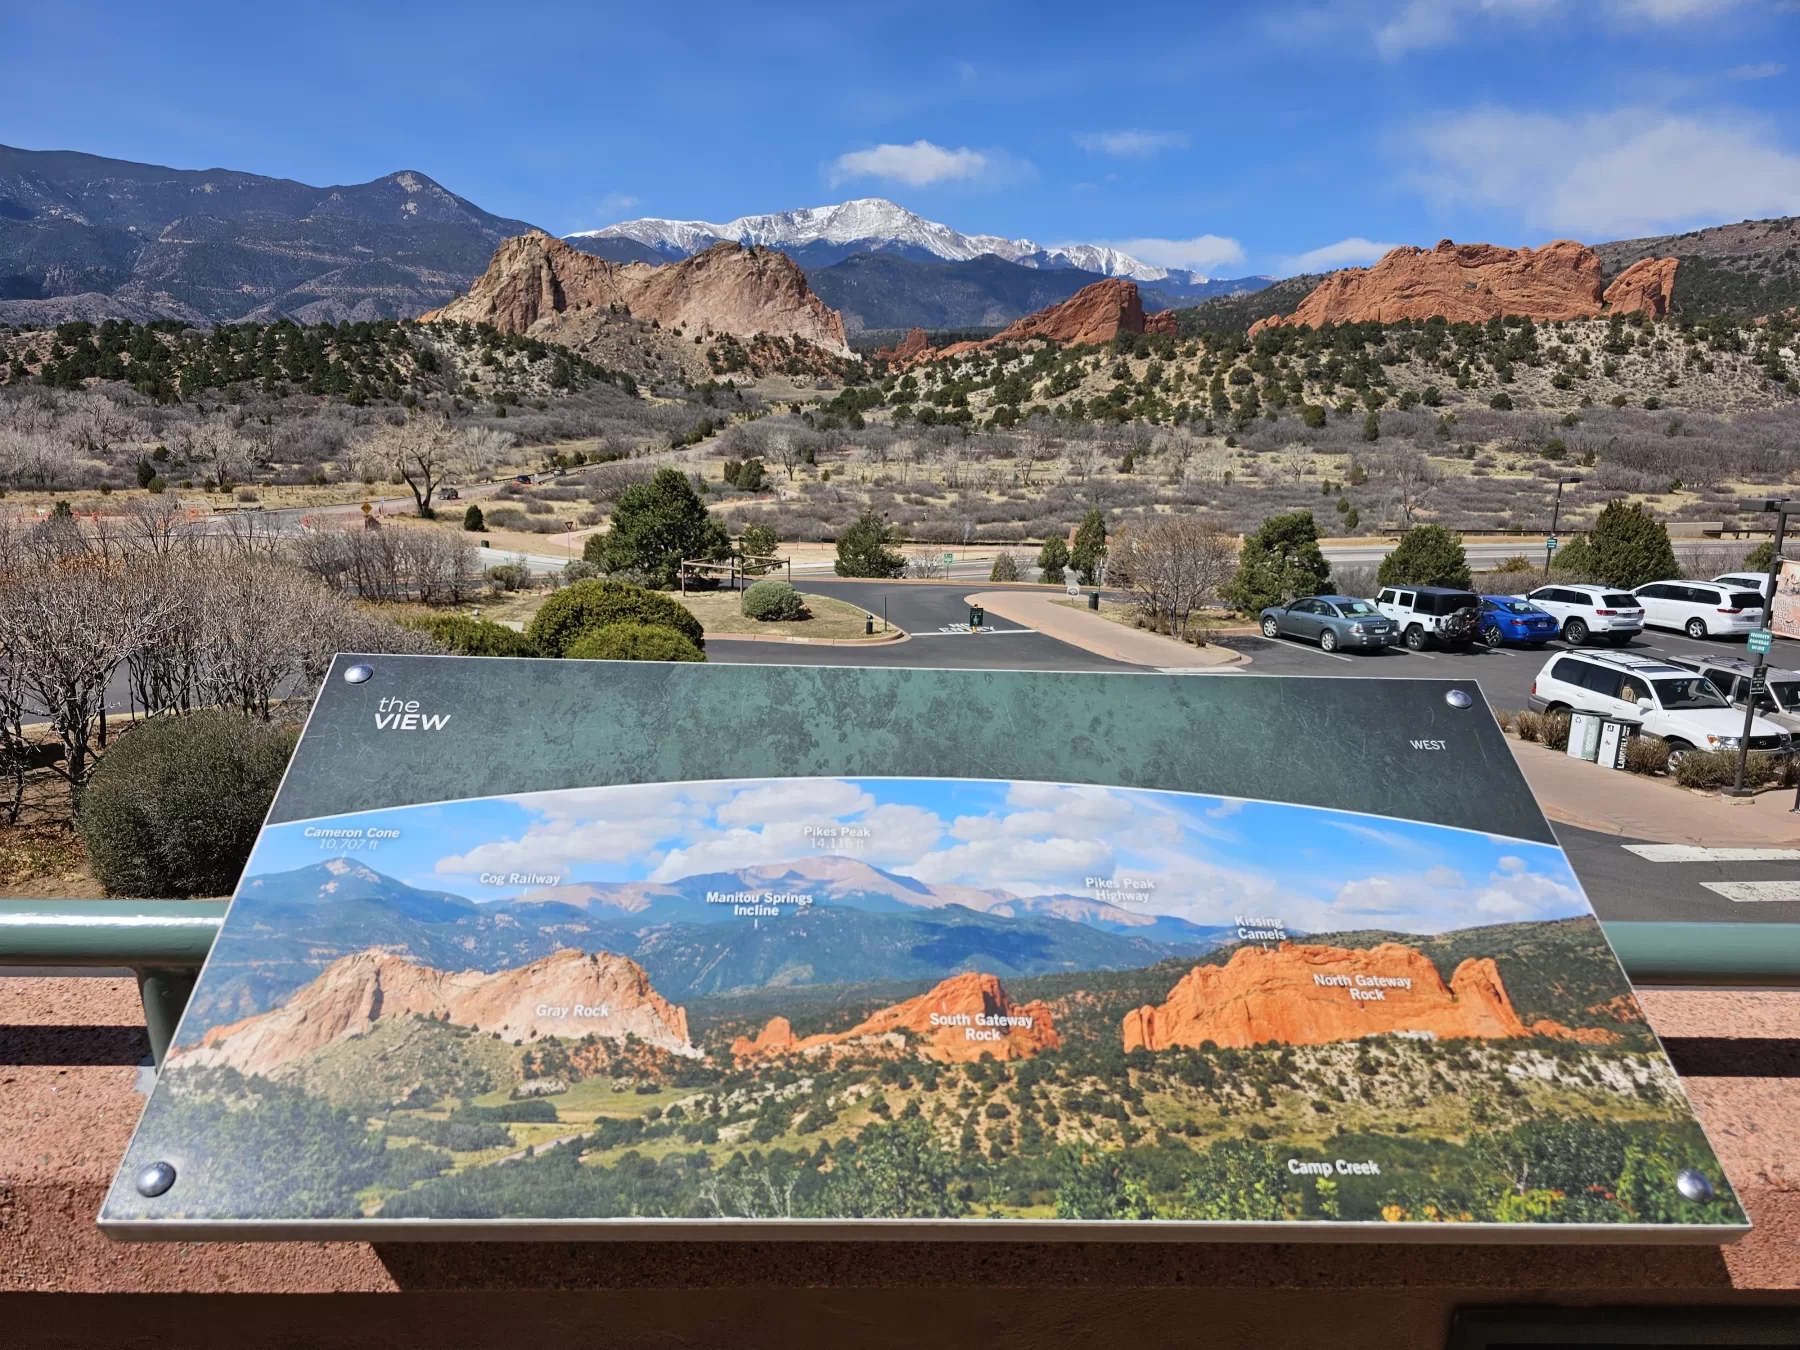 Experience the stunning beauty of Colorado at the must-visit destination, Garden of the Gods. This 1,341-acre park features towering sandstone formations, colossal red rocks, and trails of varying difficulty.